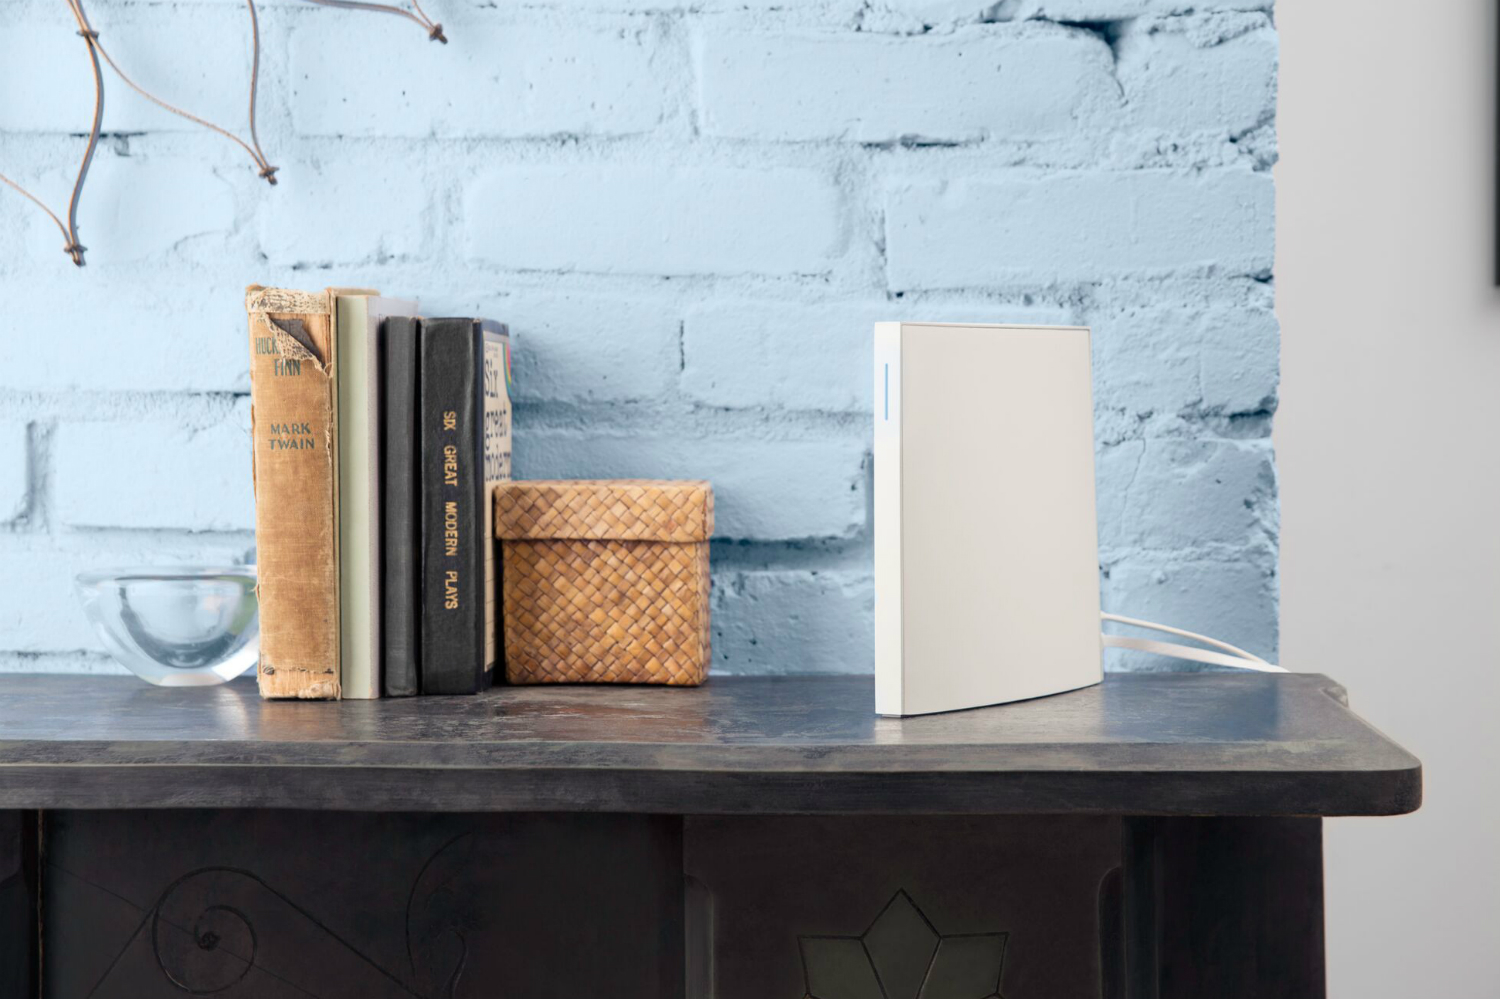 wink introduces its new 99 smart home hub 2